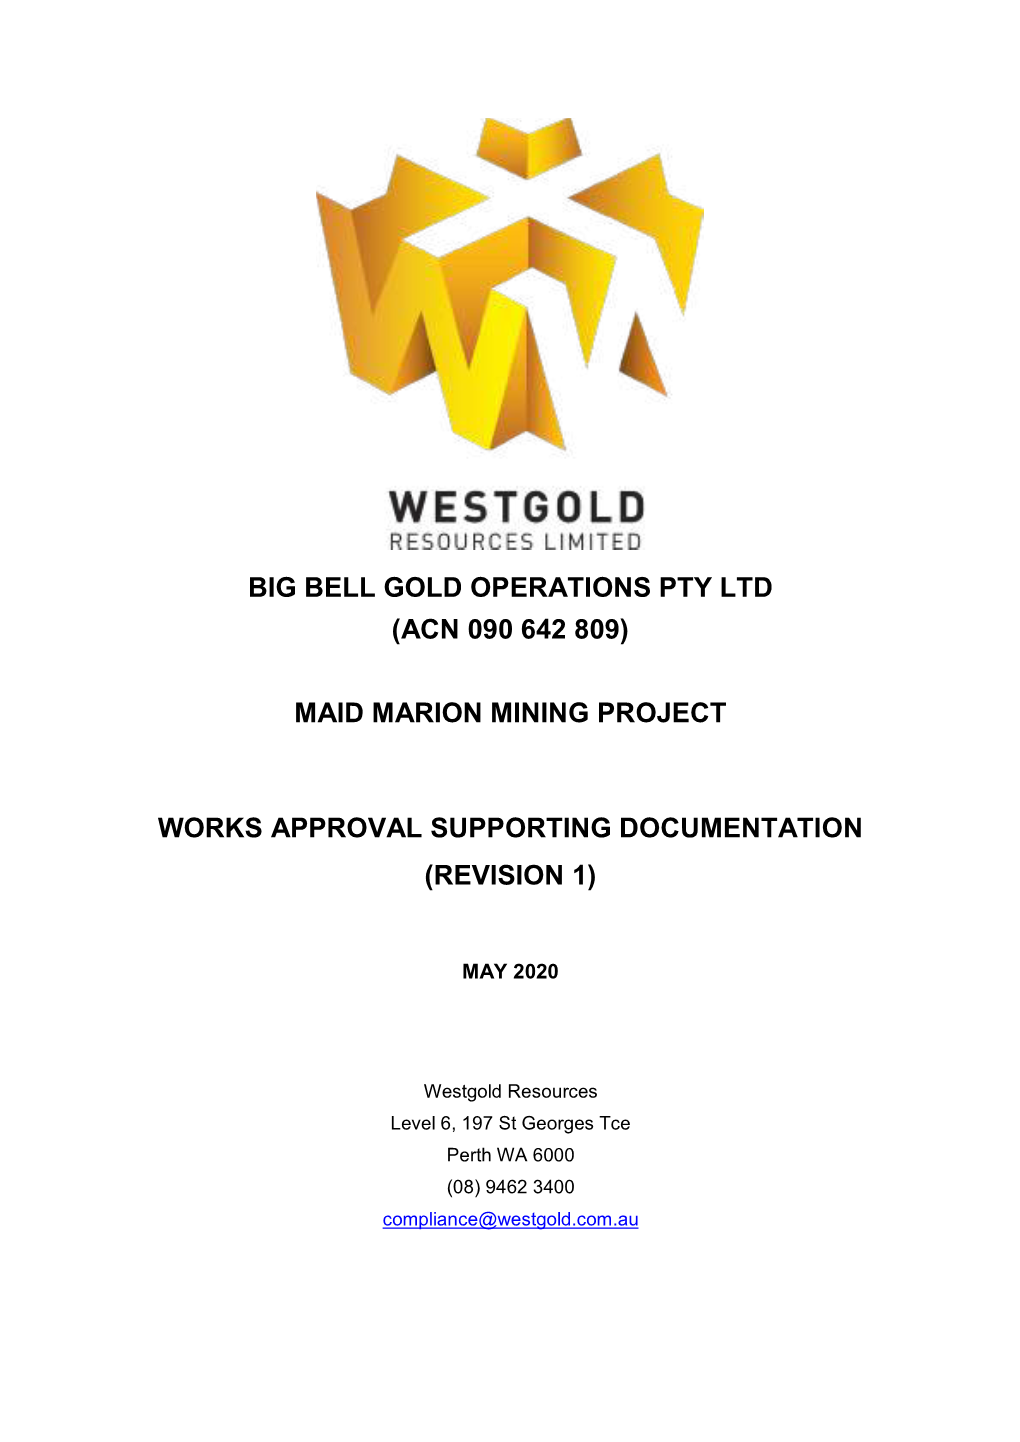 Big Bell Gold Operations Pty Ltd (Acn 090 642 809) Maid